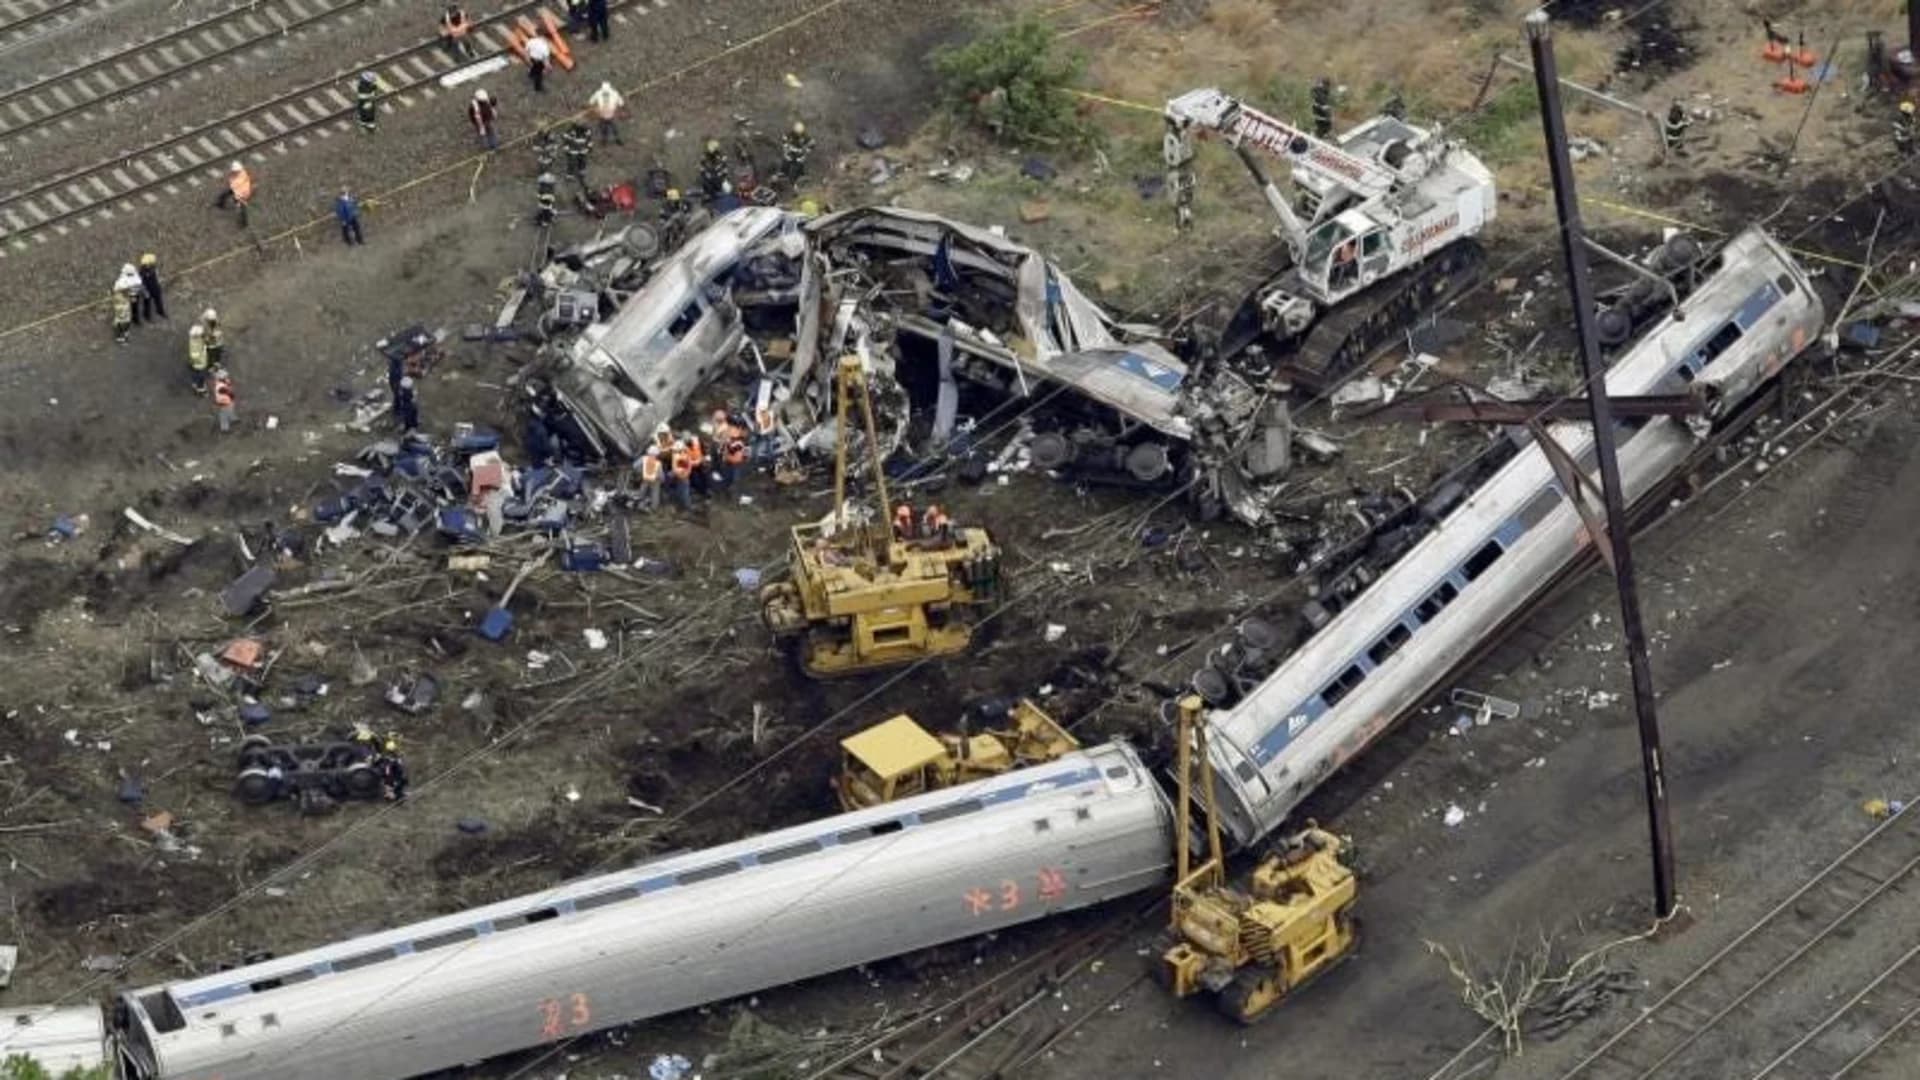 Engineer charged in deadly Amtrak crash in Philadelphia